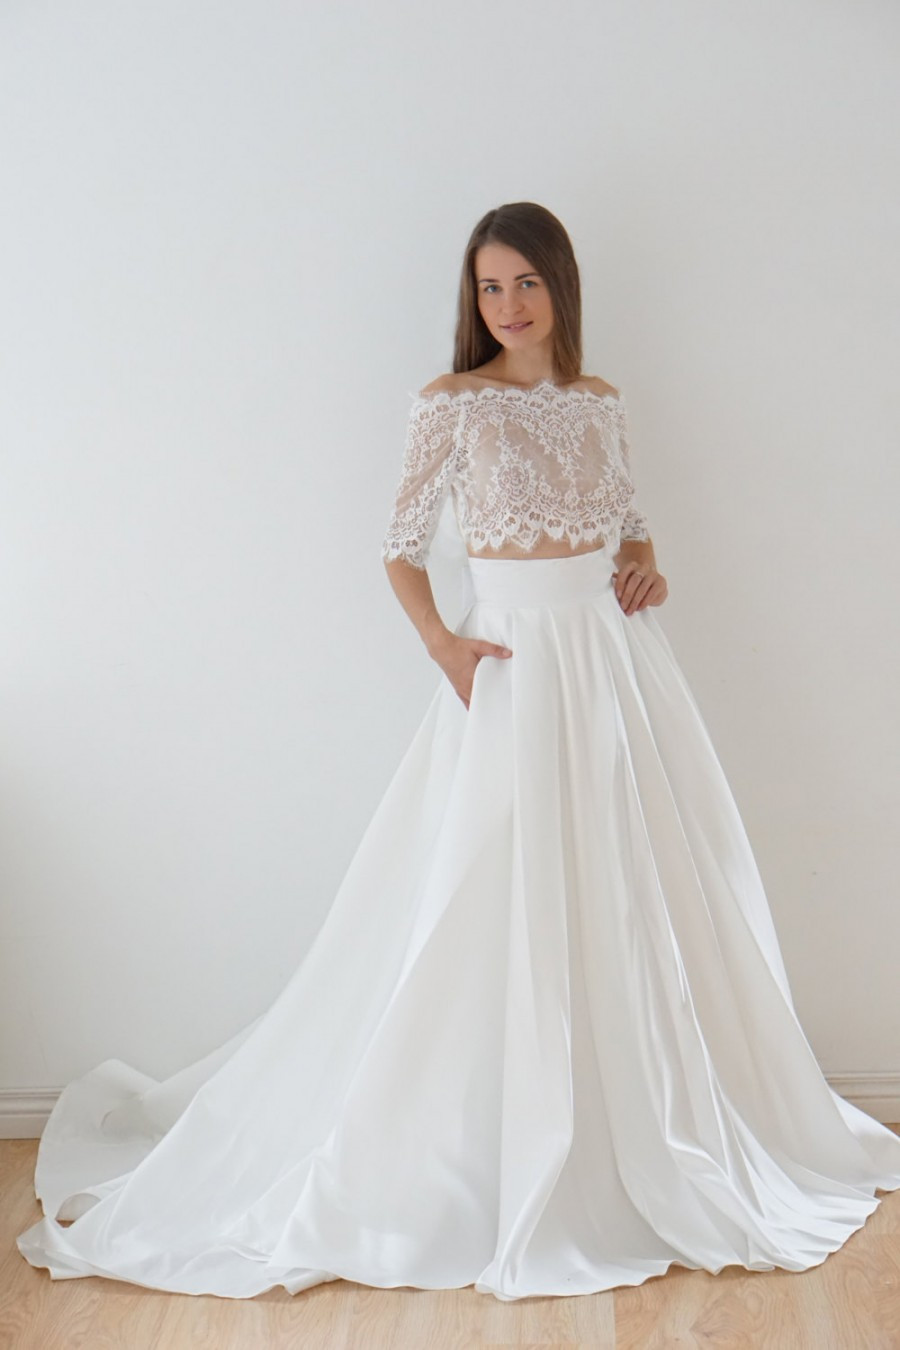 Lace Top Wedding Dress
 Scalloped Lace Top Two piece Bridal Wedding Dress Lunss